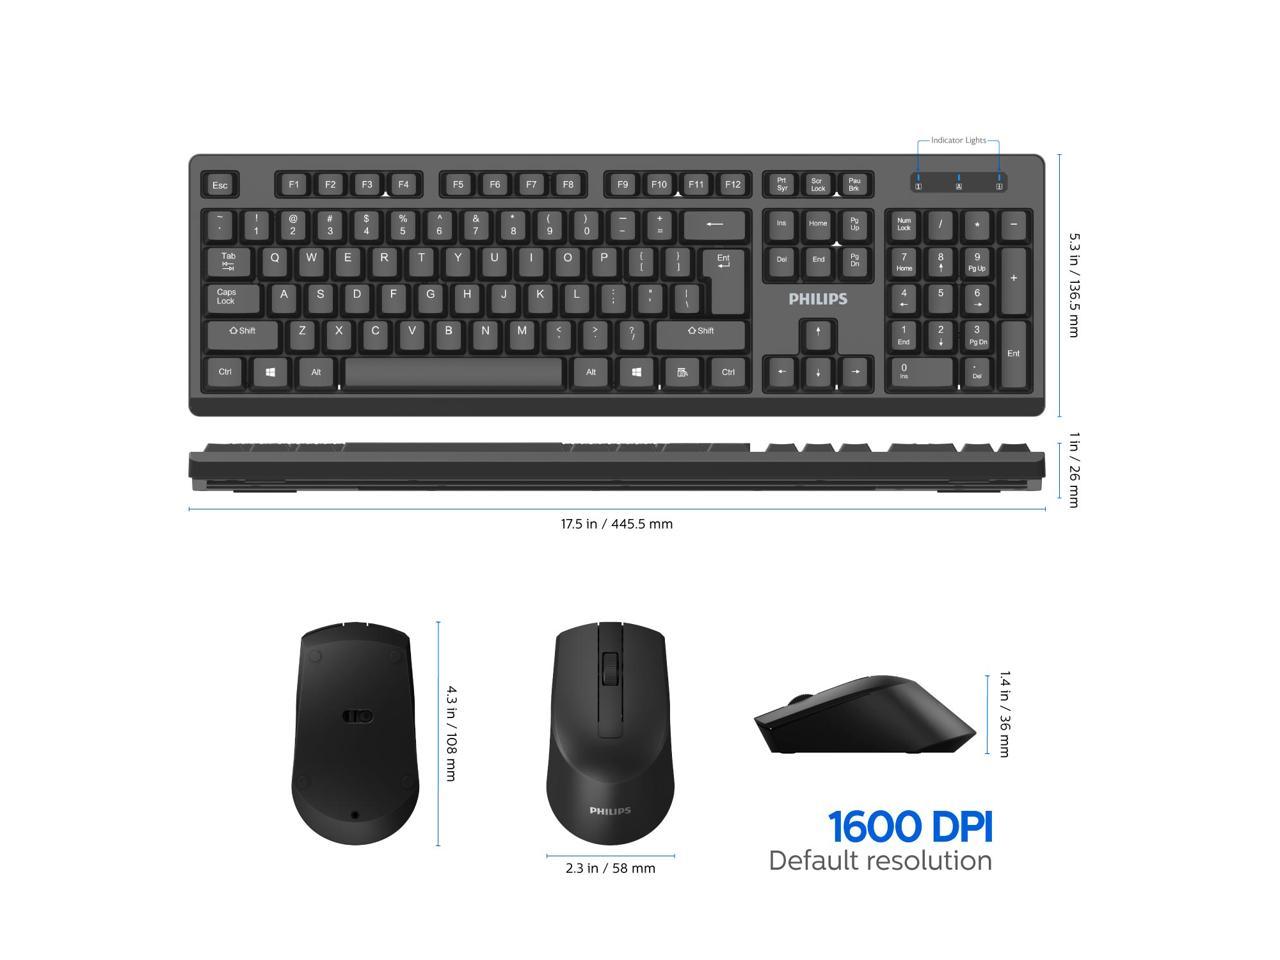 Philips SPT6354 Wireless Black Keyboard & Mouse Combo* New in Box *